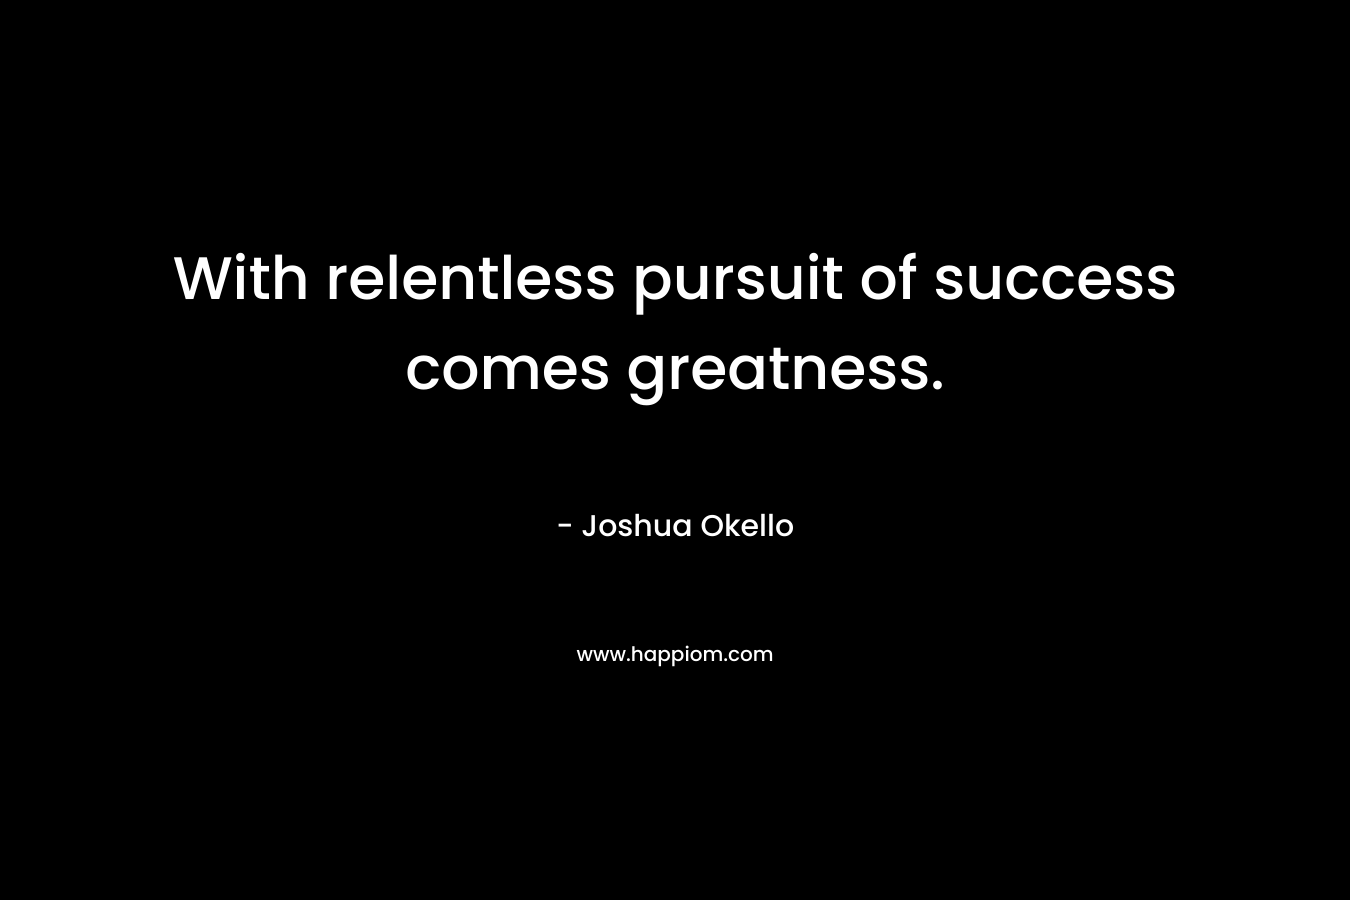 With relentless pursuit of success comes greatness.